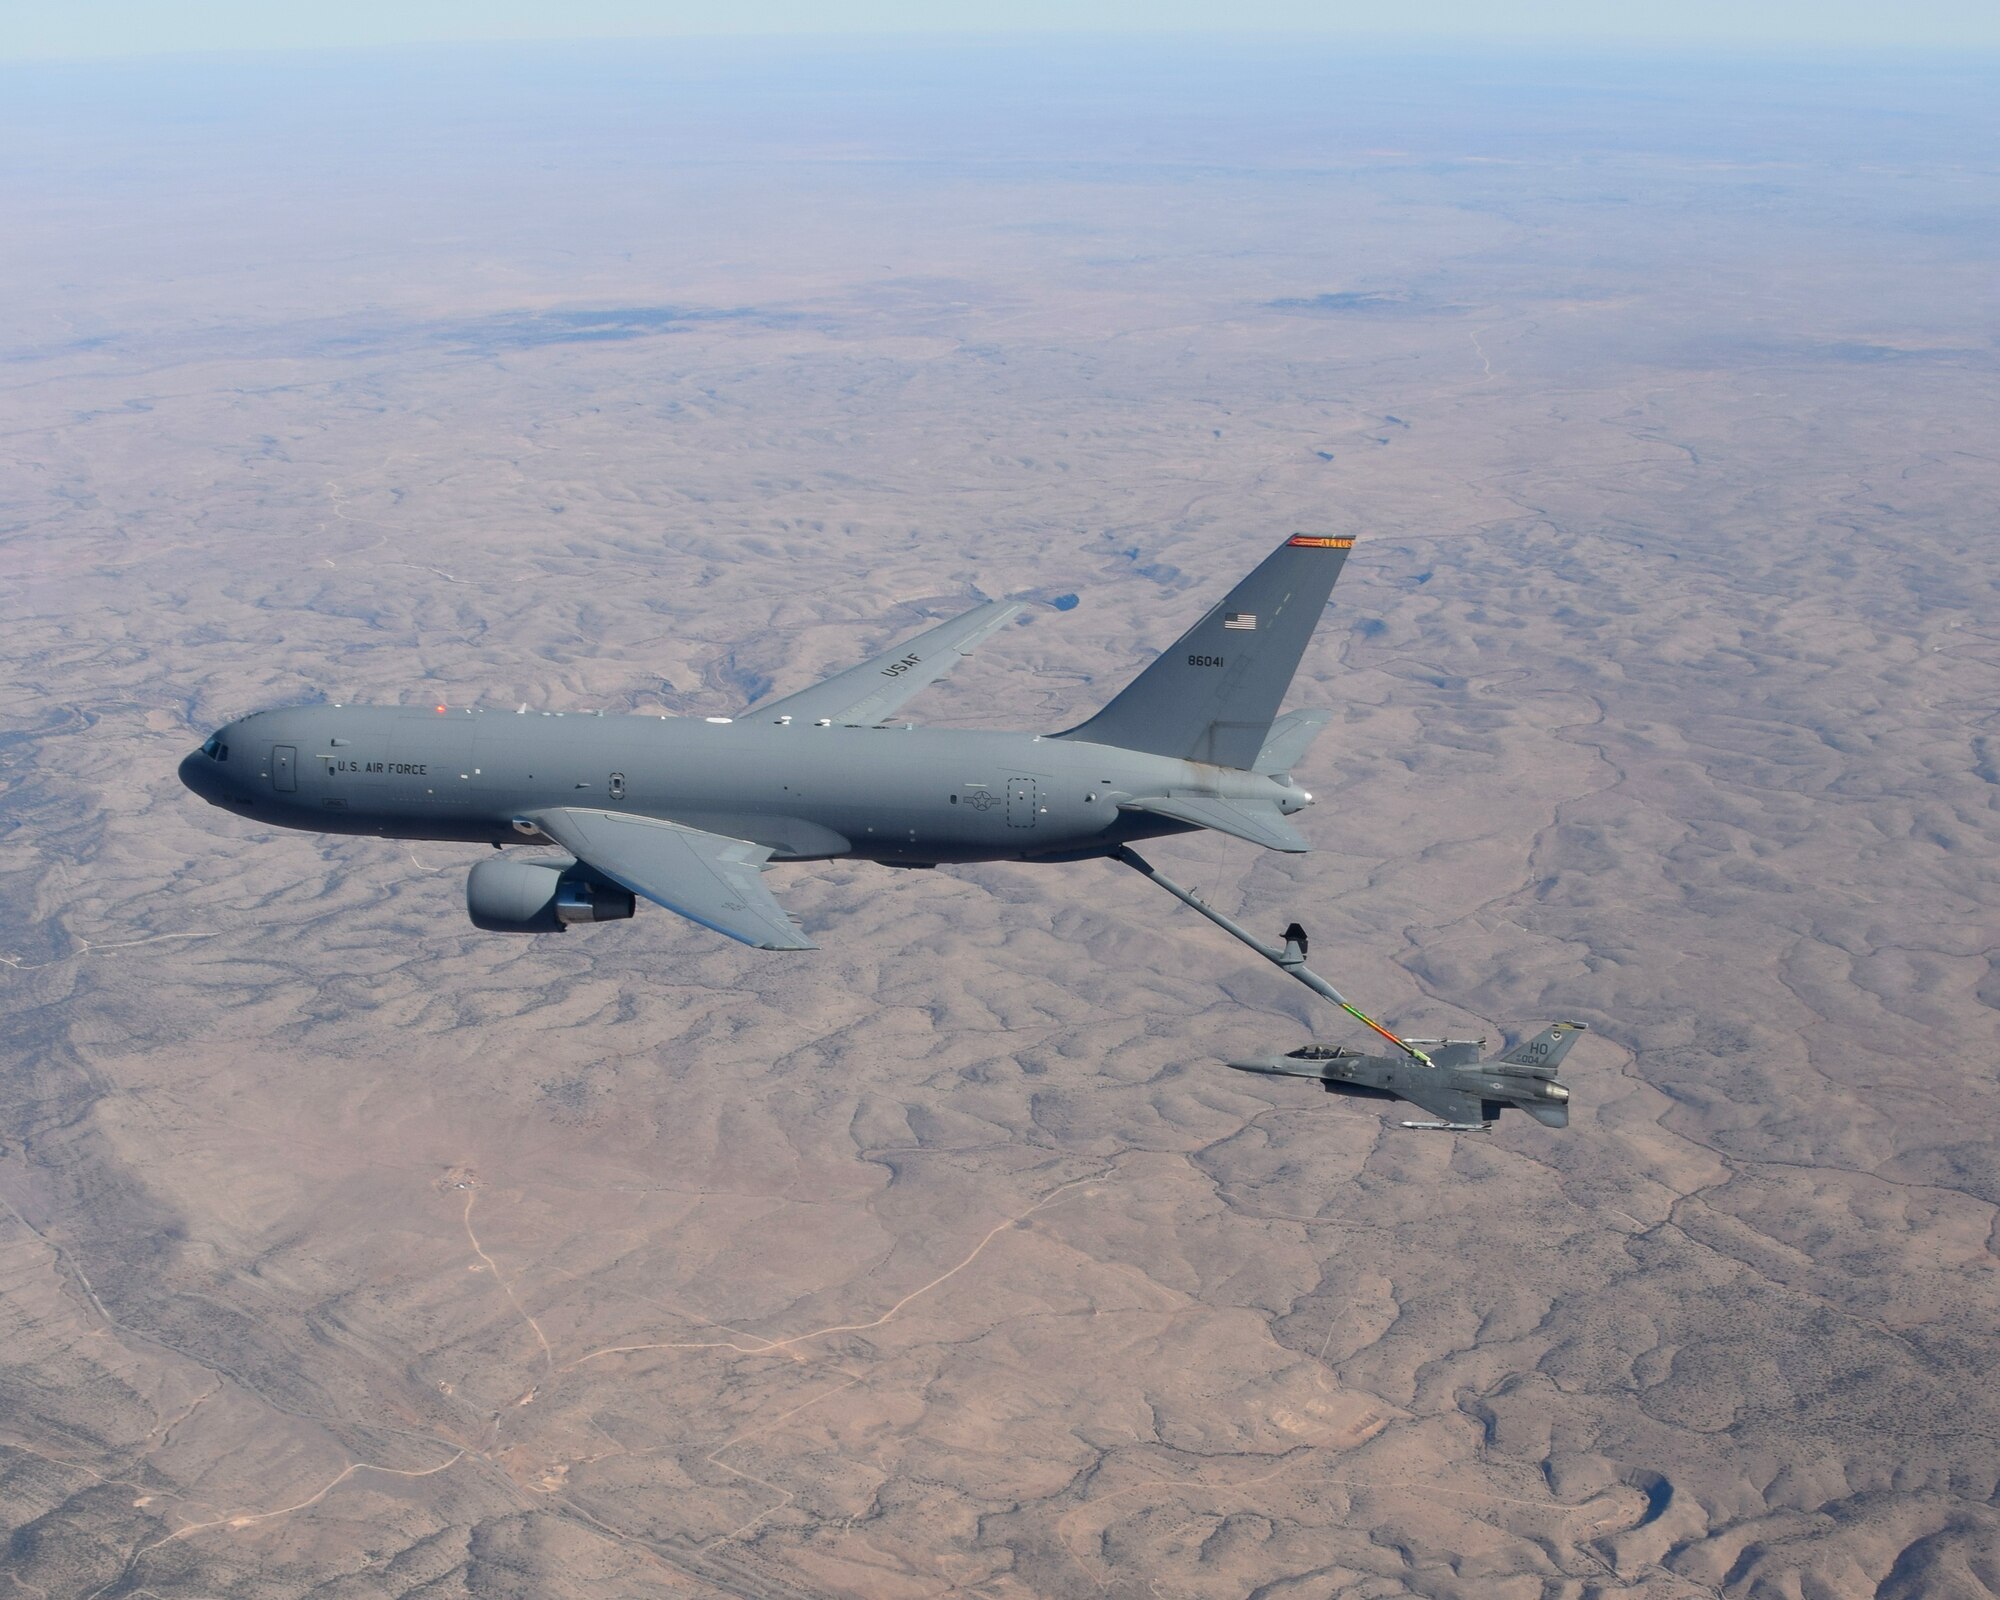 A KC-46 Pegasus from the 56th Air Refueling Squadron at Altus Air Force Base (AFB), Oklahoma, refuels an F-16 Fighting Falcon from the 49th Wing at Holloman AFB, New Mexico, December 7, 2020. Two Altus AFB KC-46s and ten Holloman AFB F-16s teamed up in the skies over New Mexico to practice air refueling operations. (Courtesy photo by 1st Lt. Daniel Lee)